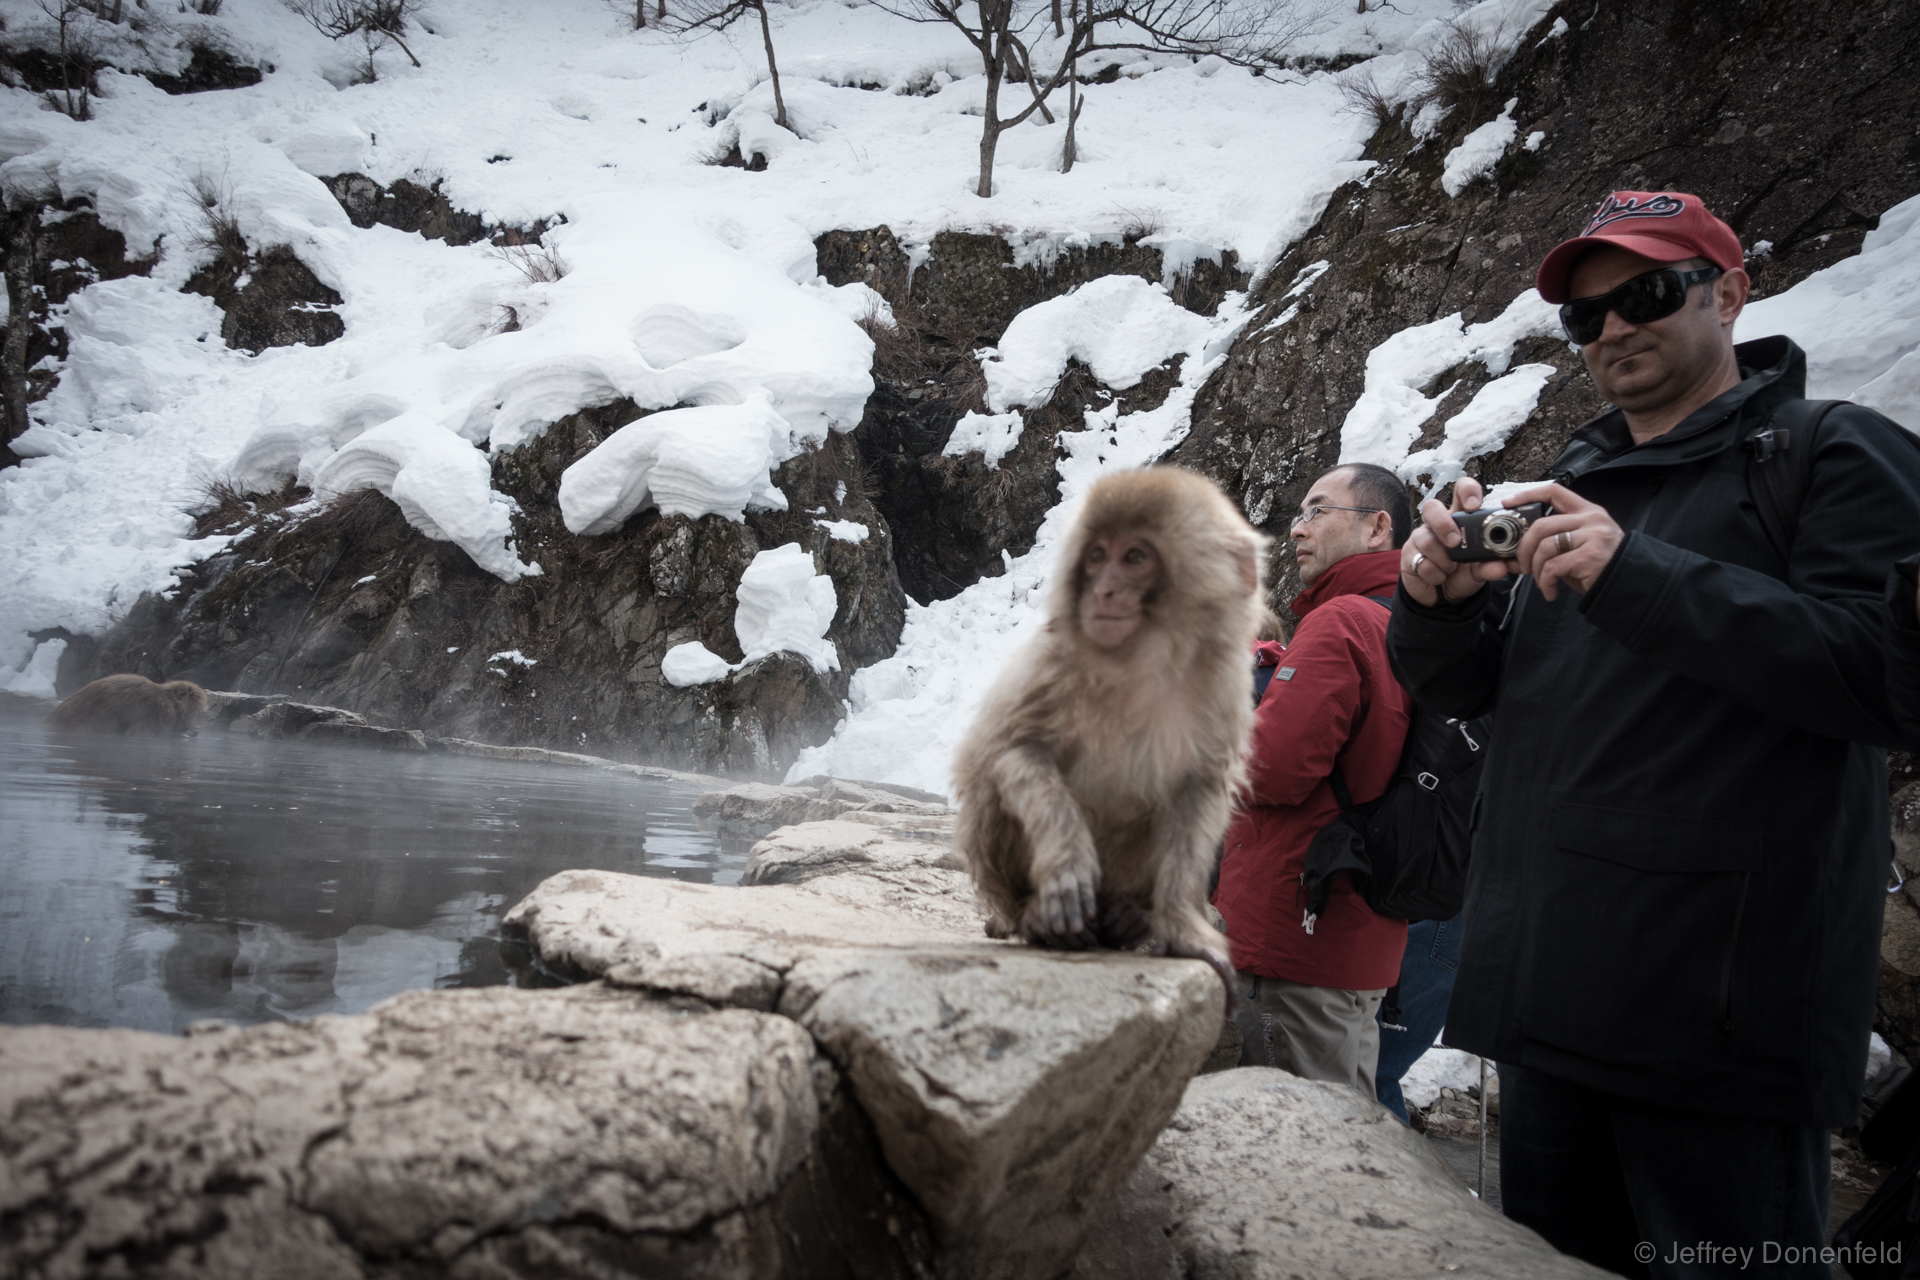 Lots of snow monkeys, lots of tourists, lots of photos.